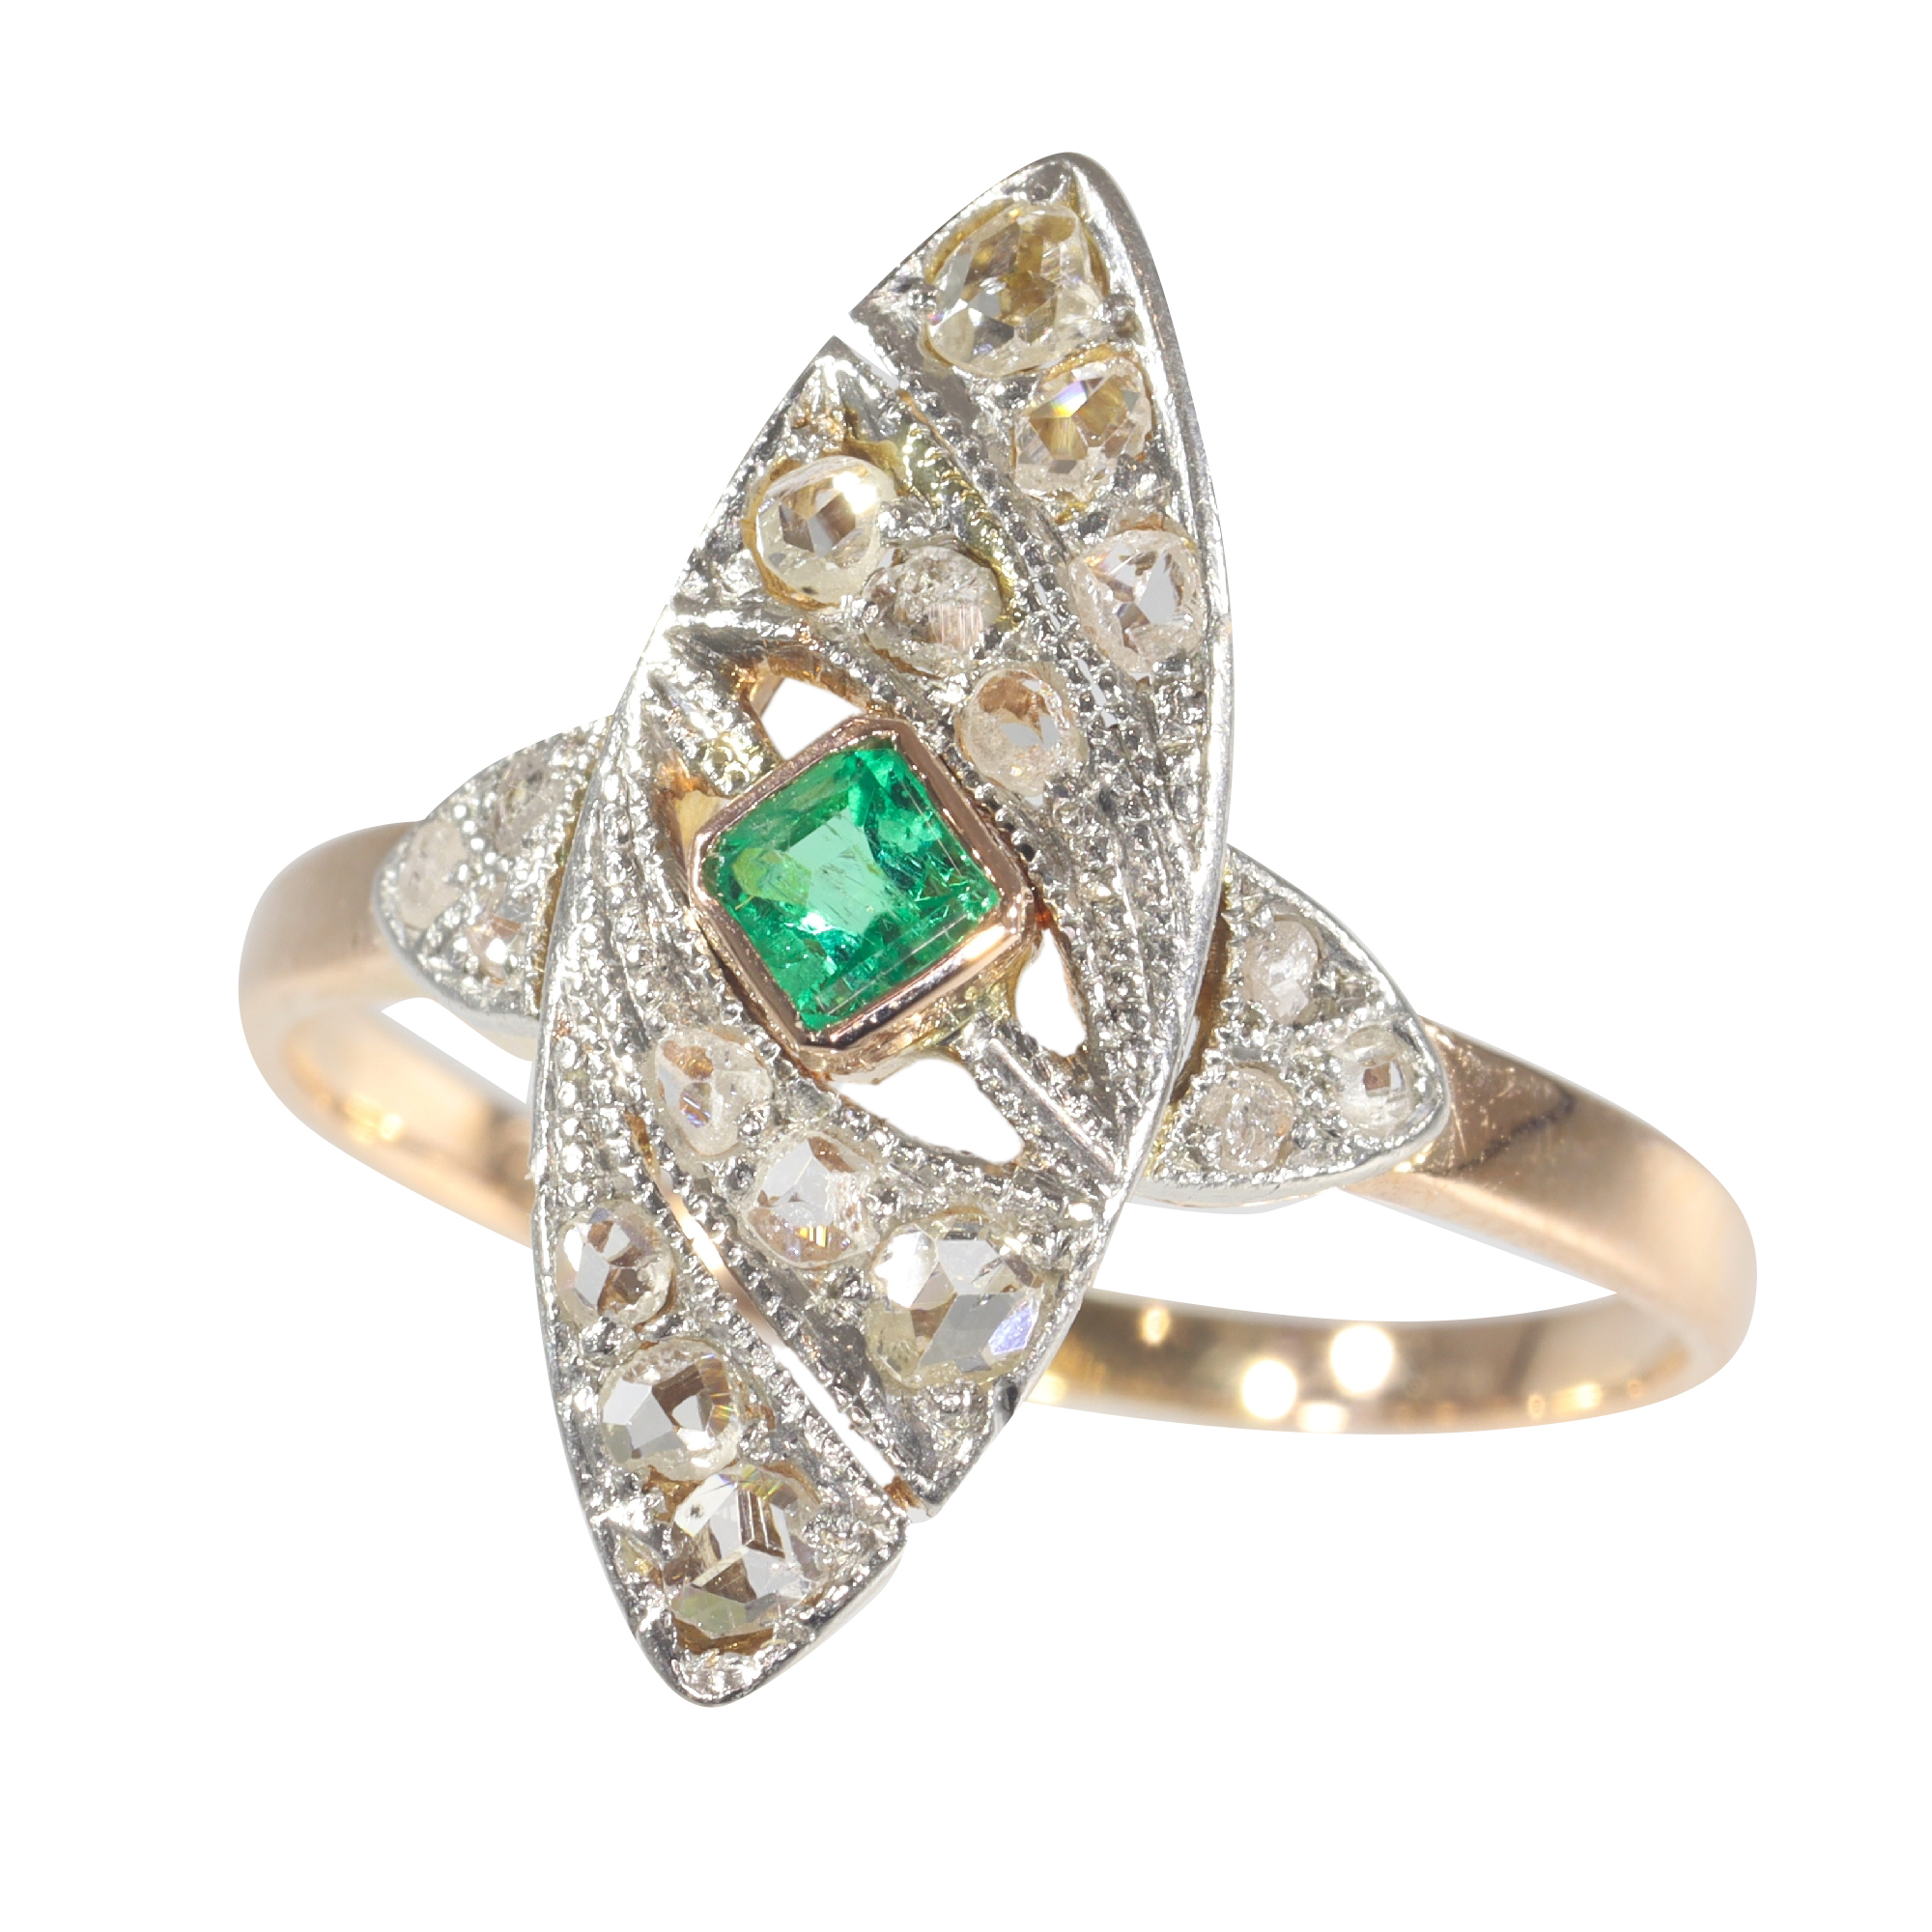 Vintage 1920's Art Deco diamond and high quality emerald ring